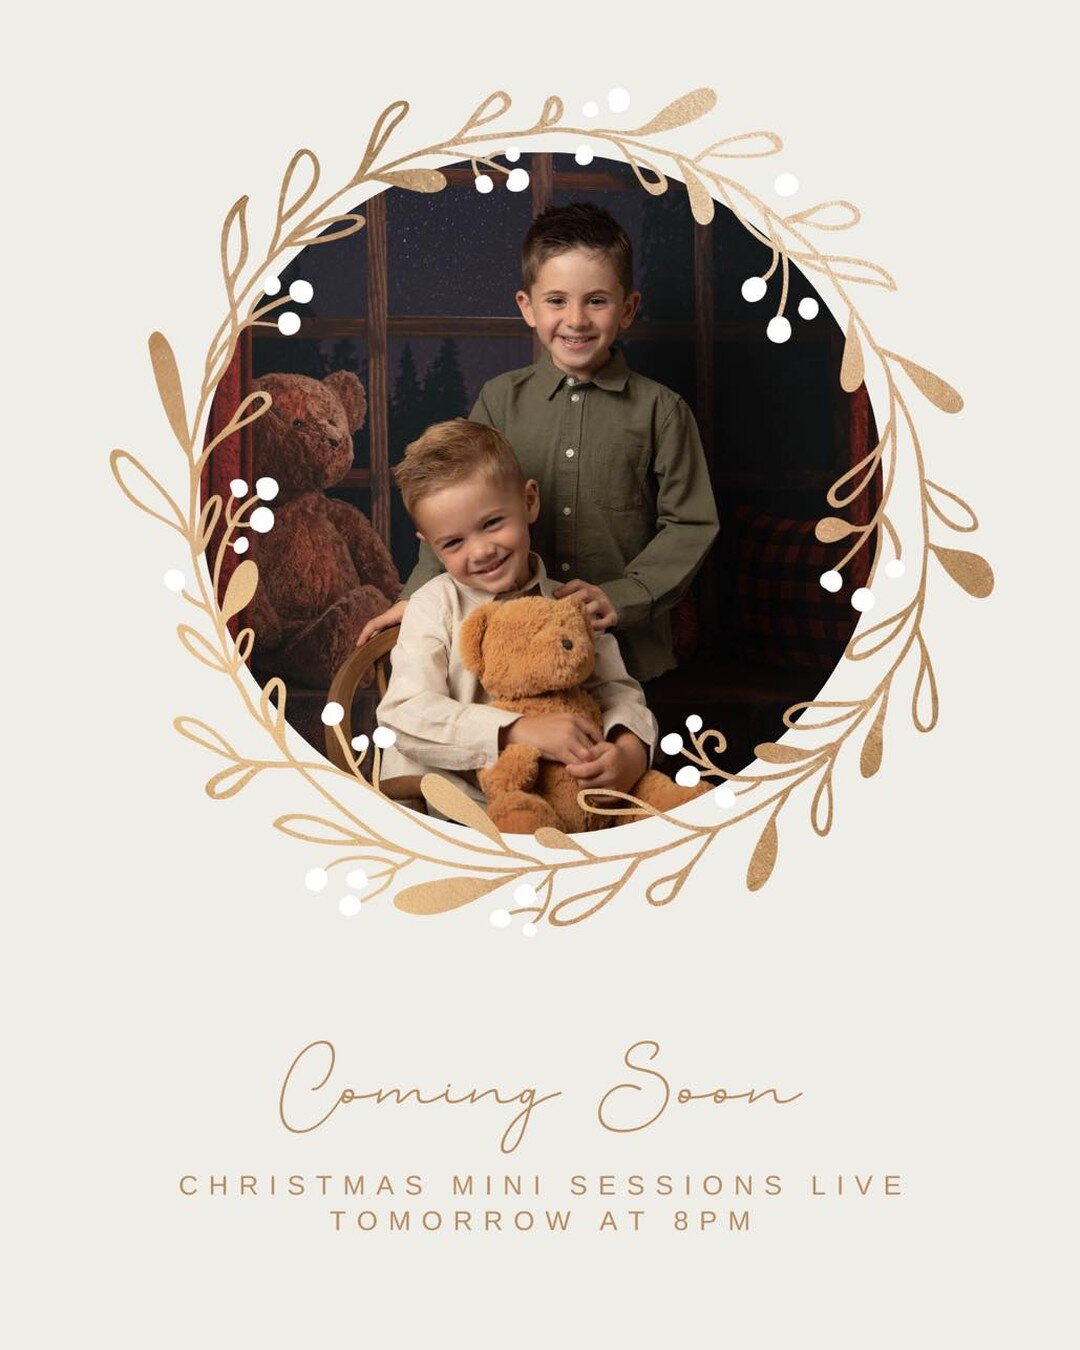 Only 24hrs to go until our Christmas mini sessions are on SALE 😬

Make sure you check back tomorrow at 8pm to book your slot 🎄

VIP members have already had 24hrs to book theirs plus they&rsquo;ve still got another 24hrs to go let&rsquo;s hope they